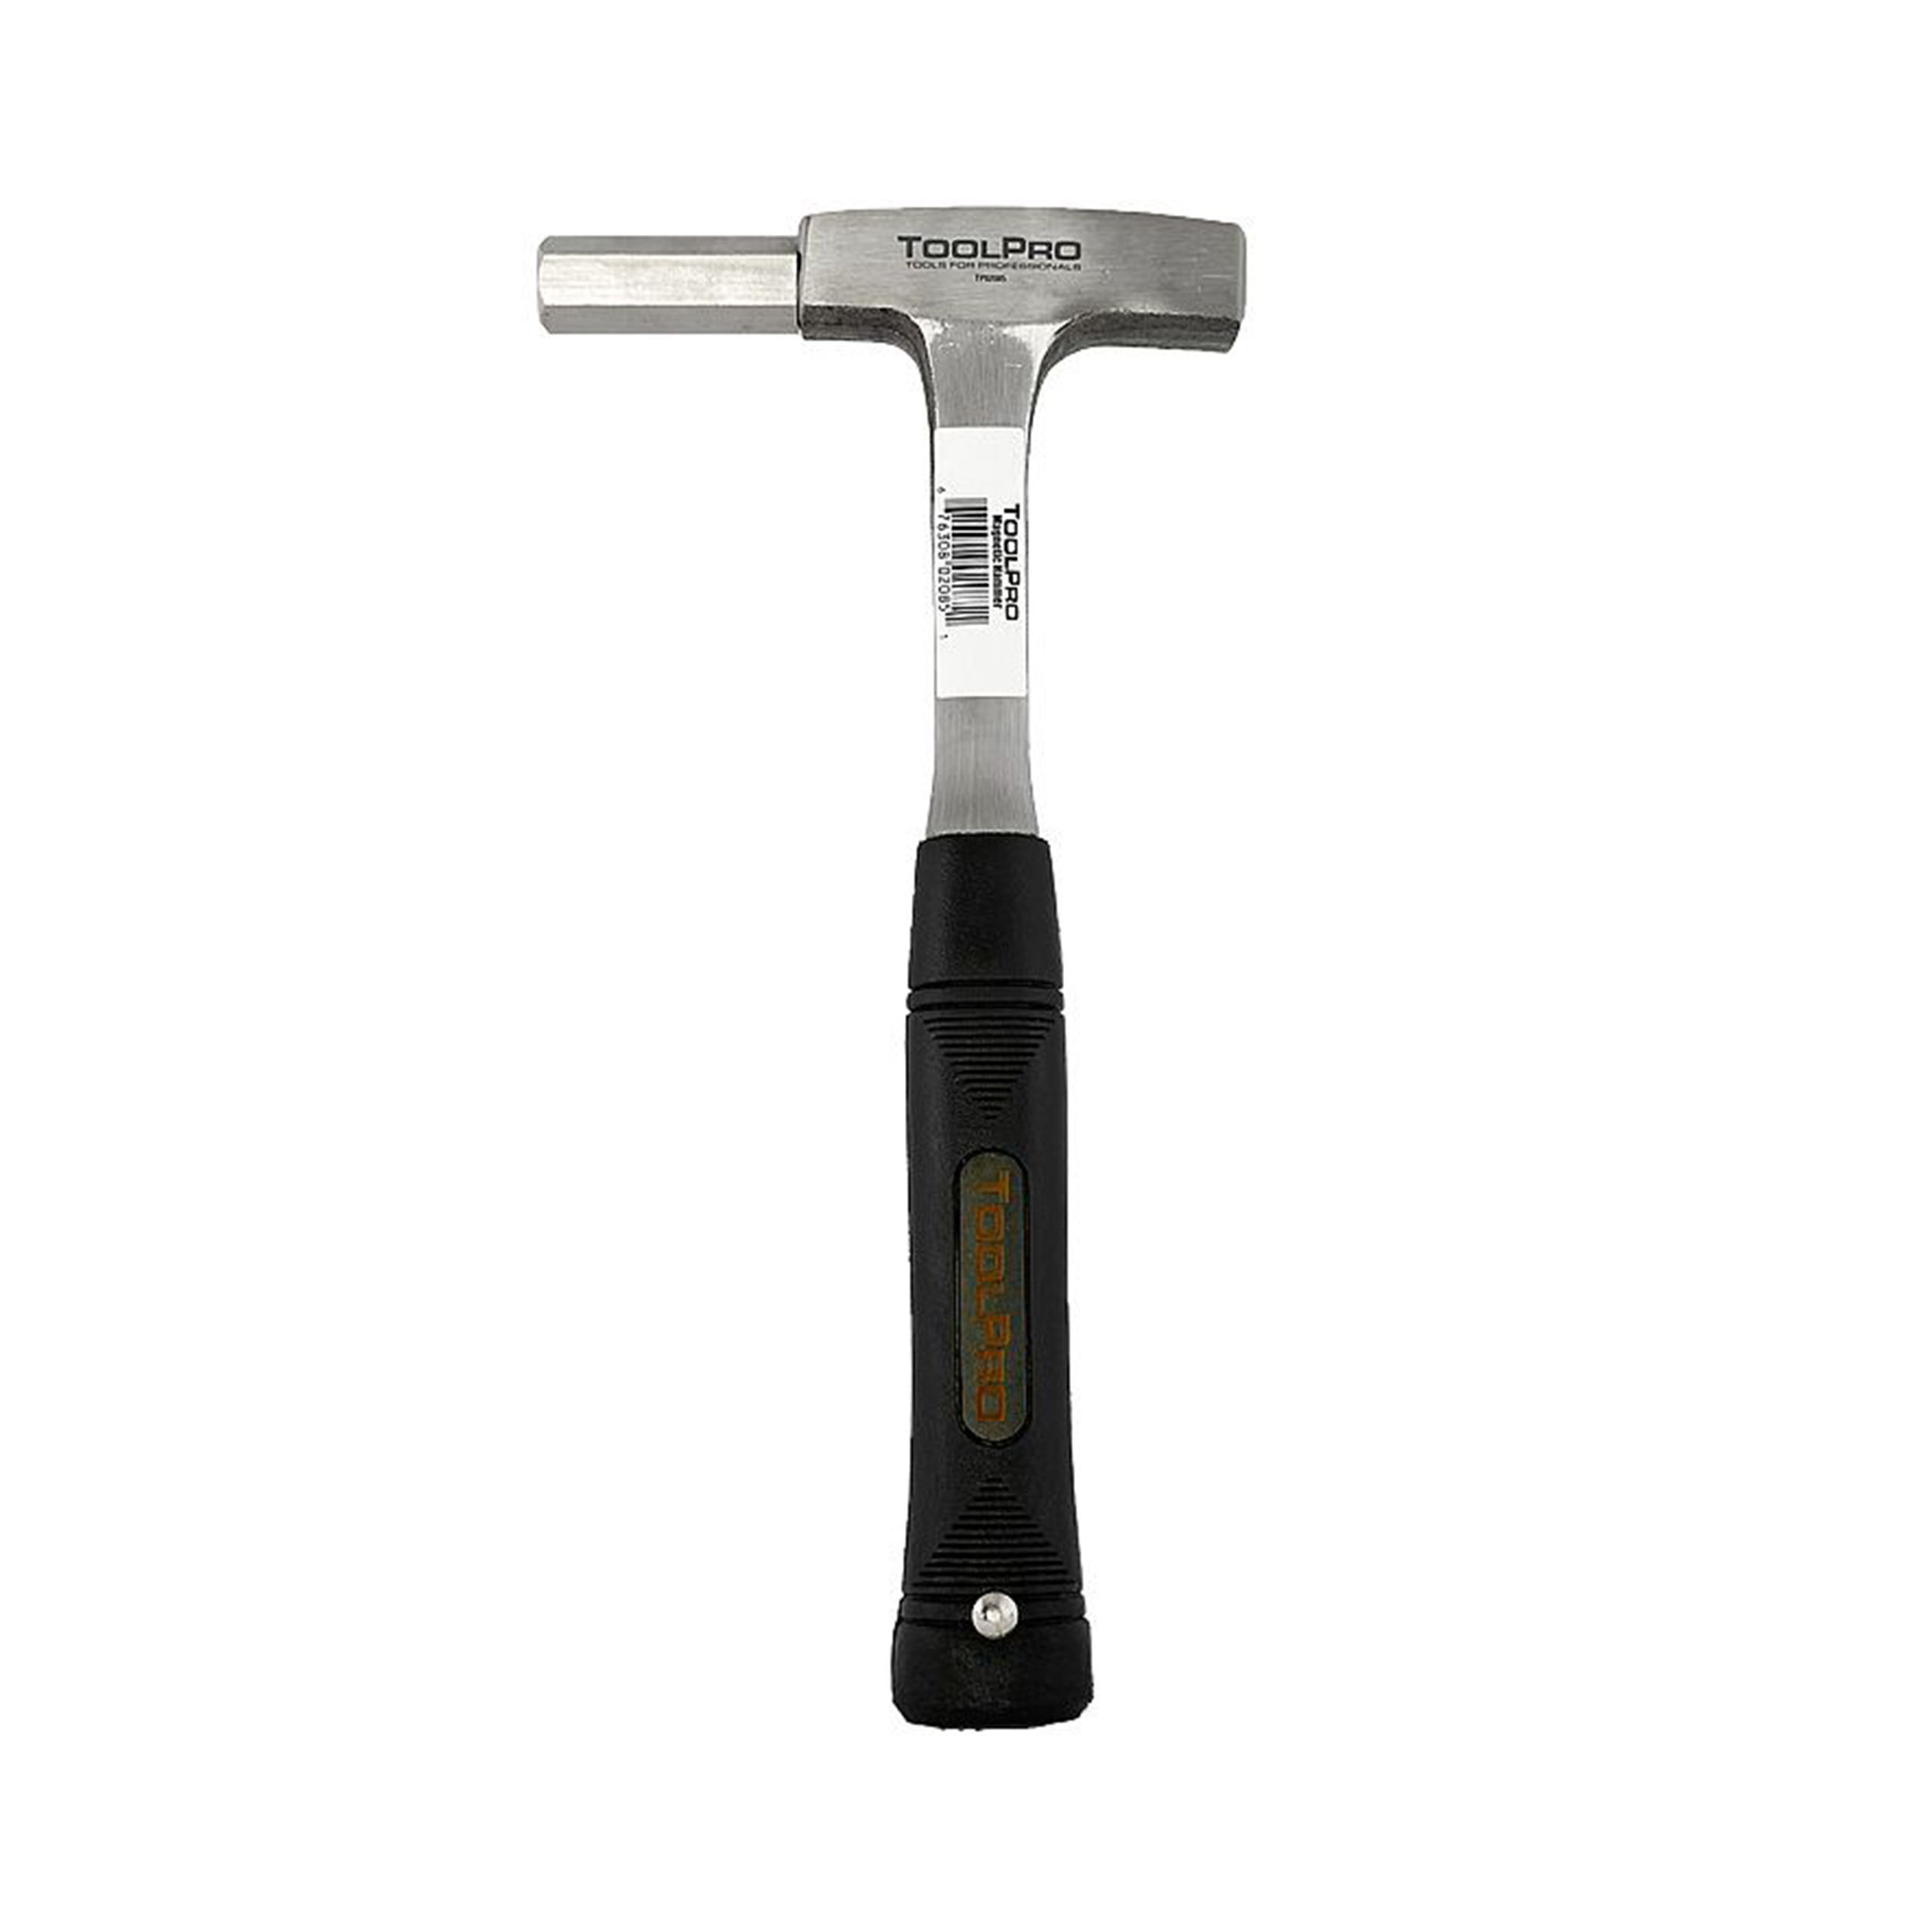 33 Oz. Magnetic Hammer With Replaceable Magnetic Head